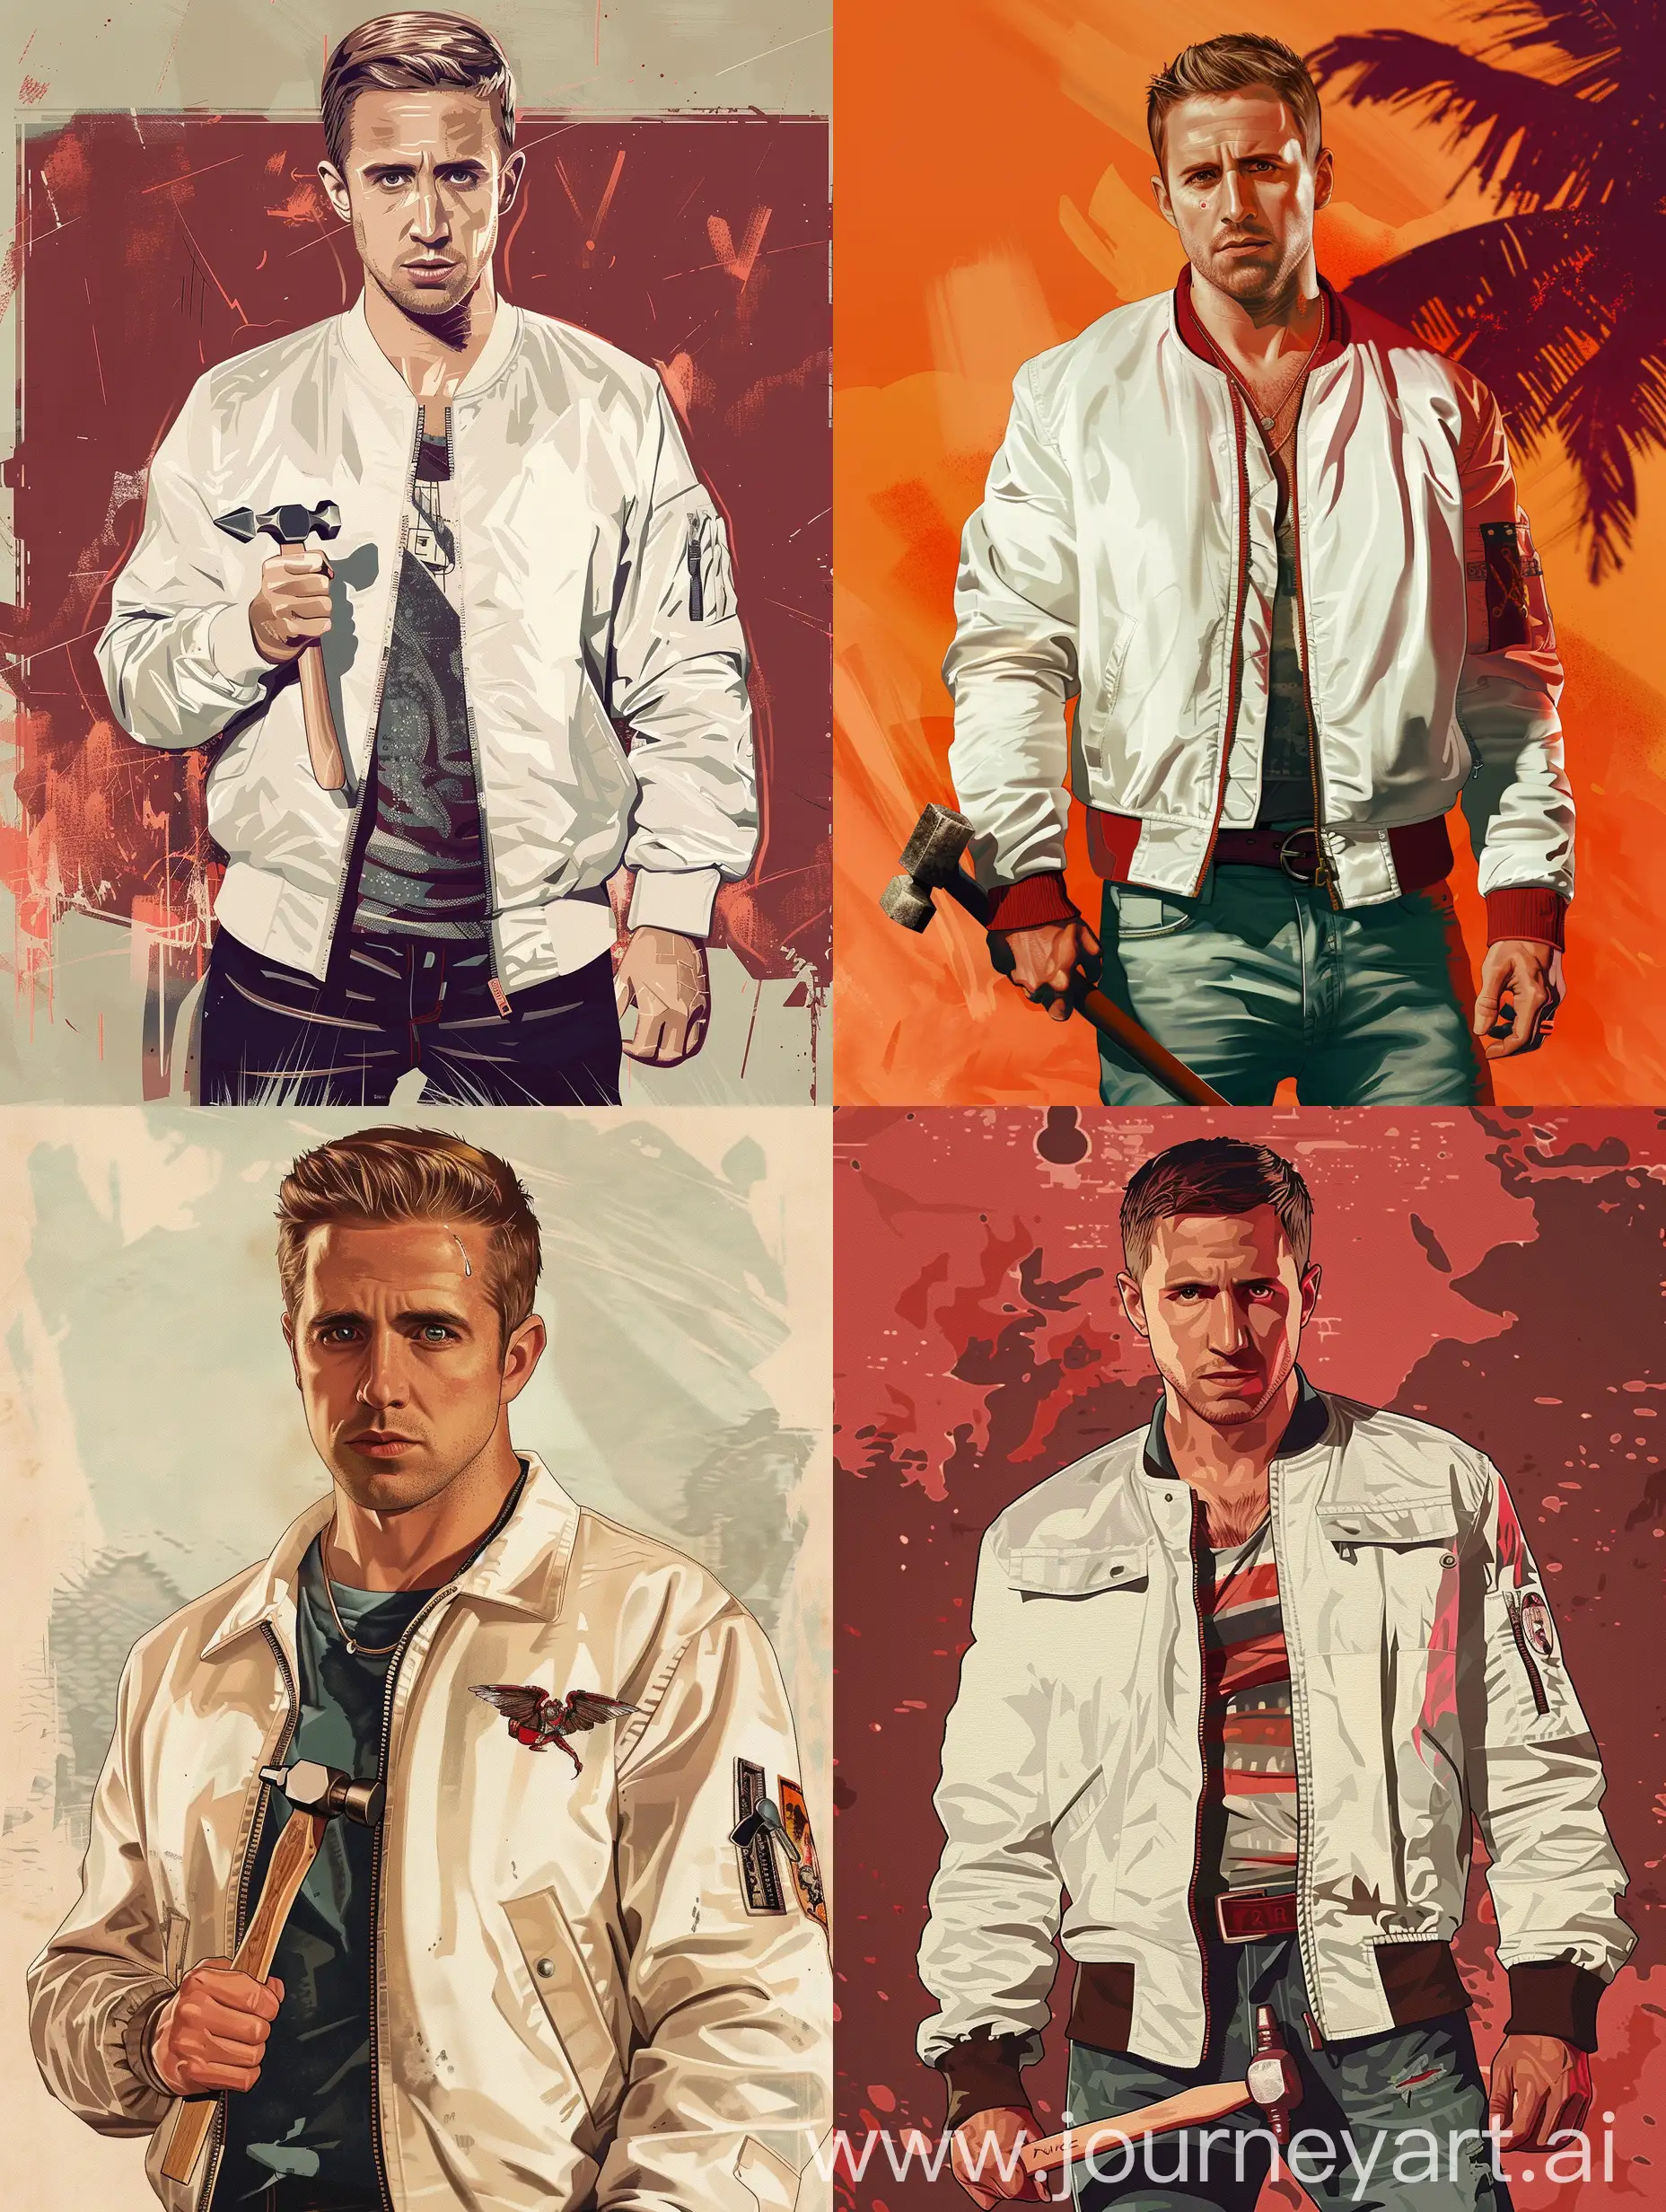 Ryan-Gosling-Drive-Movie-Poster-GTA-4-Style-with-Small-Hammer-and-White-Bomber-Jacket